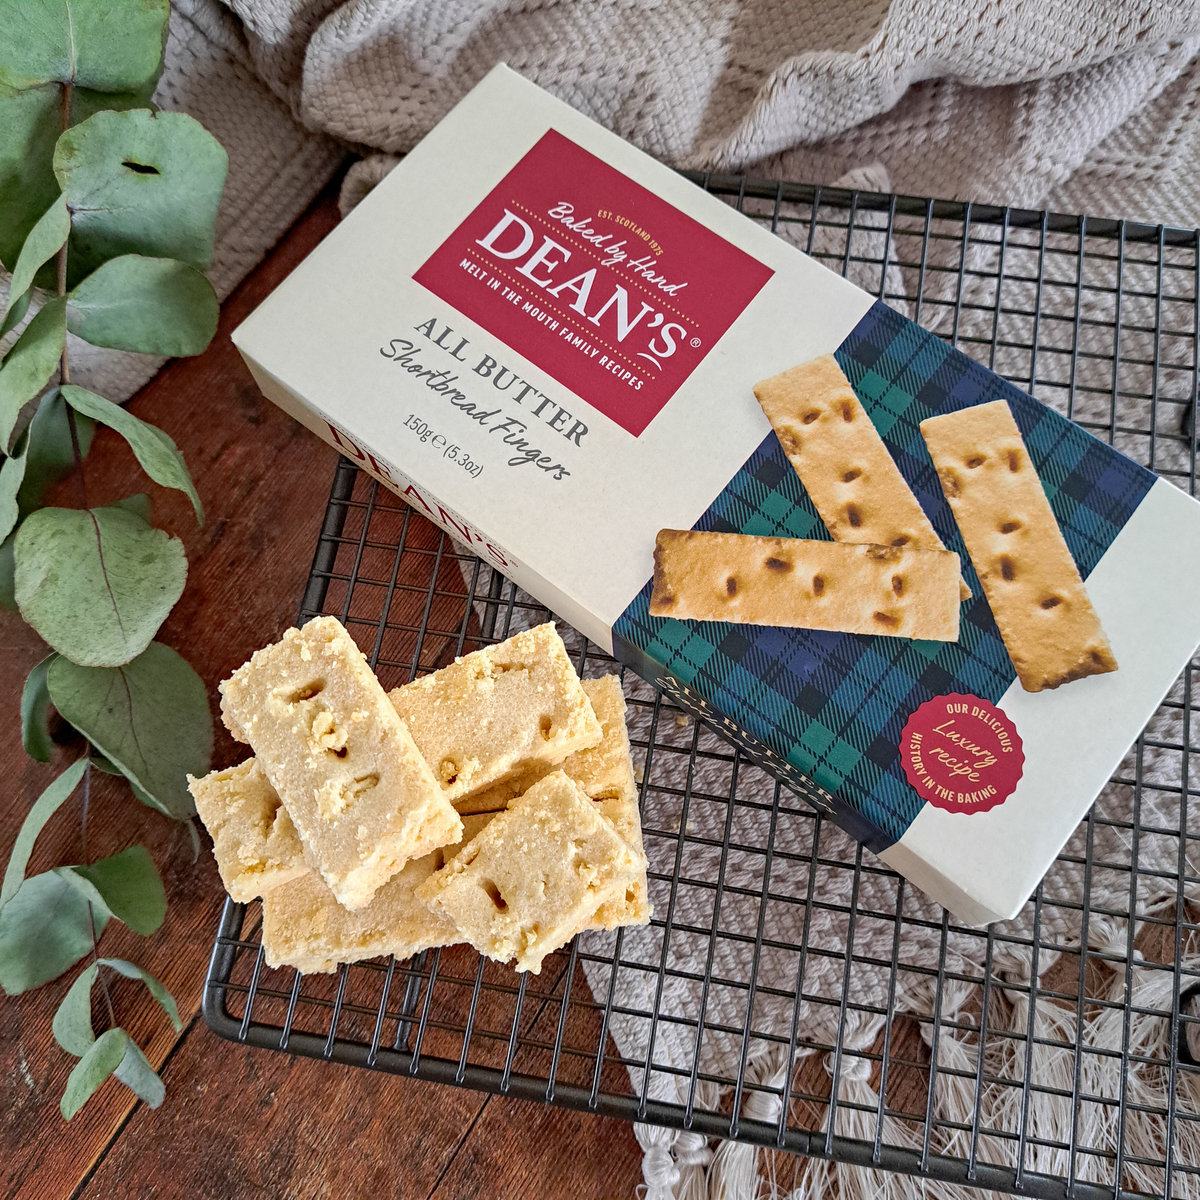 Buy the All Butter Shortbread Fingers 150g online at Dean's